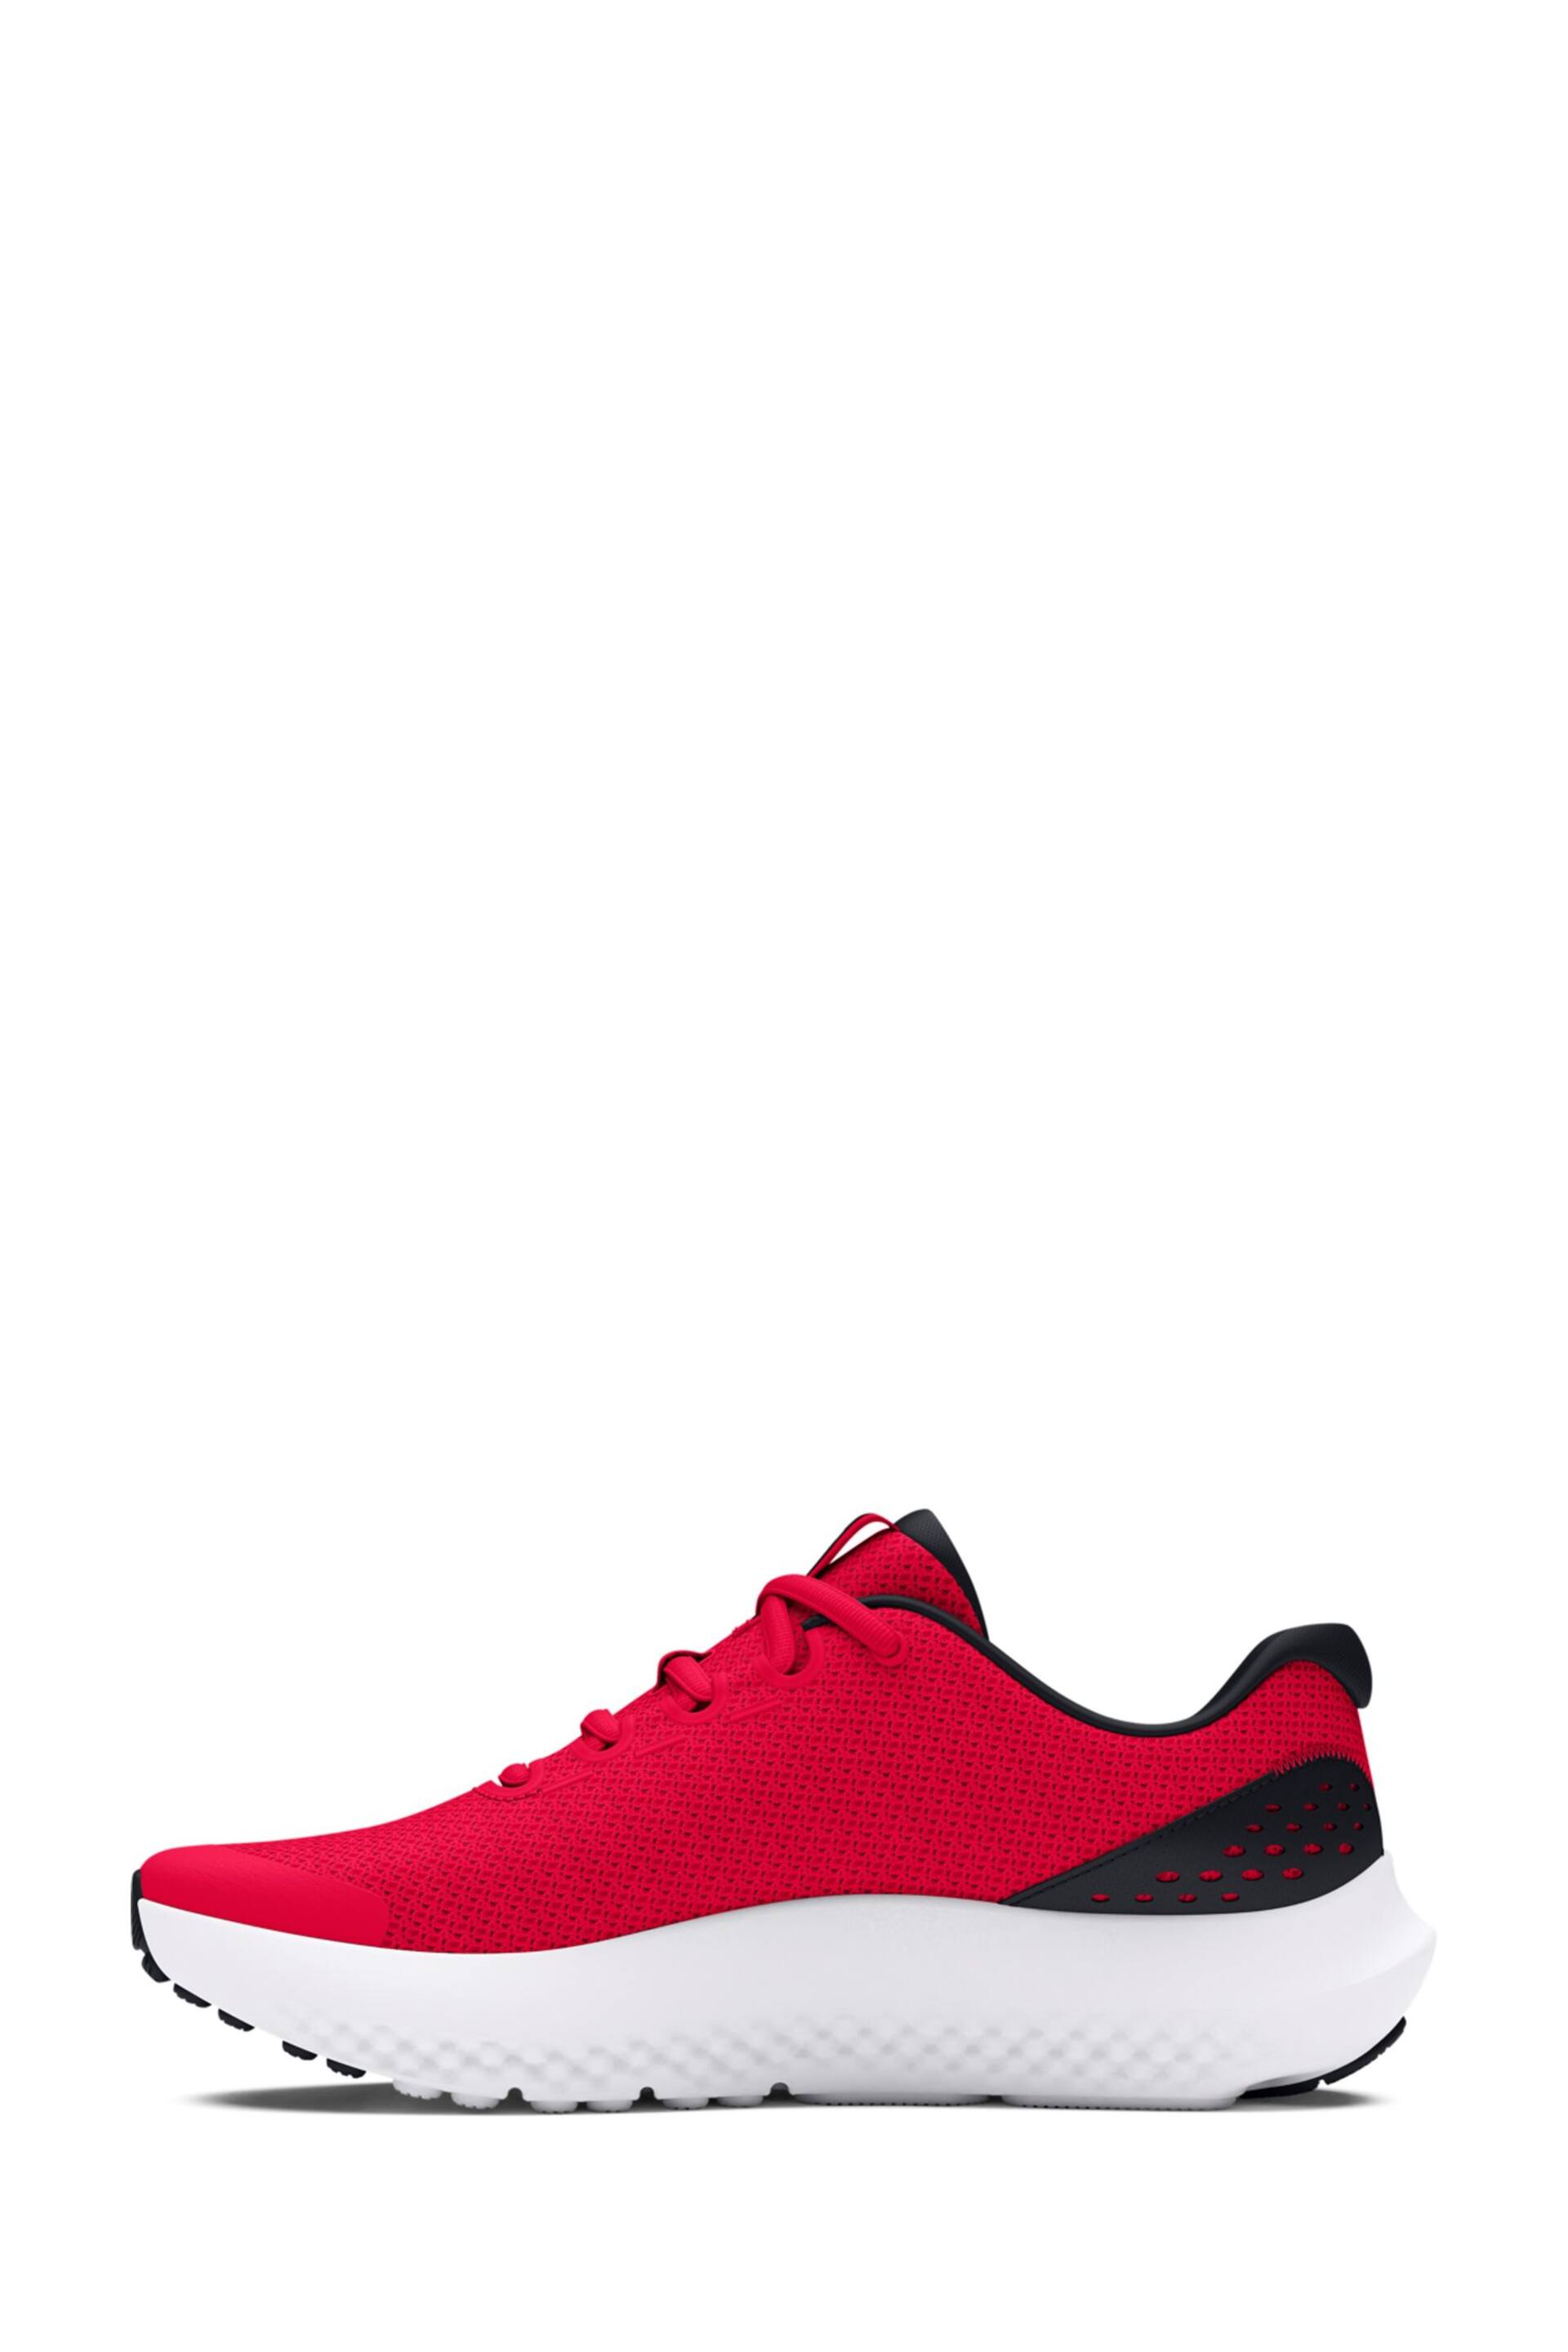 Under Armour Red Surge 4 Trainers - Image 5 of 7